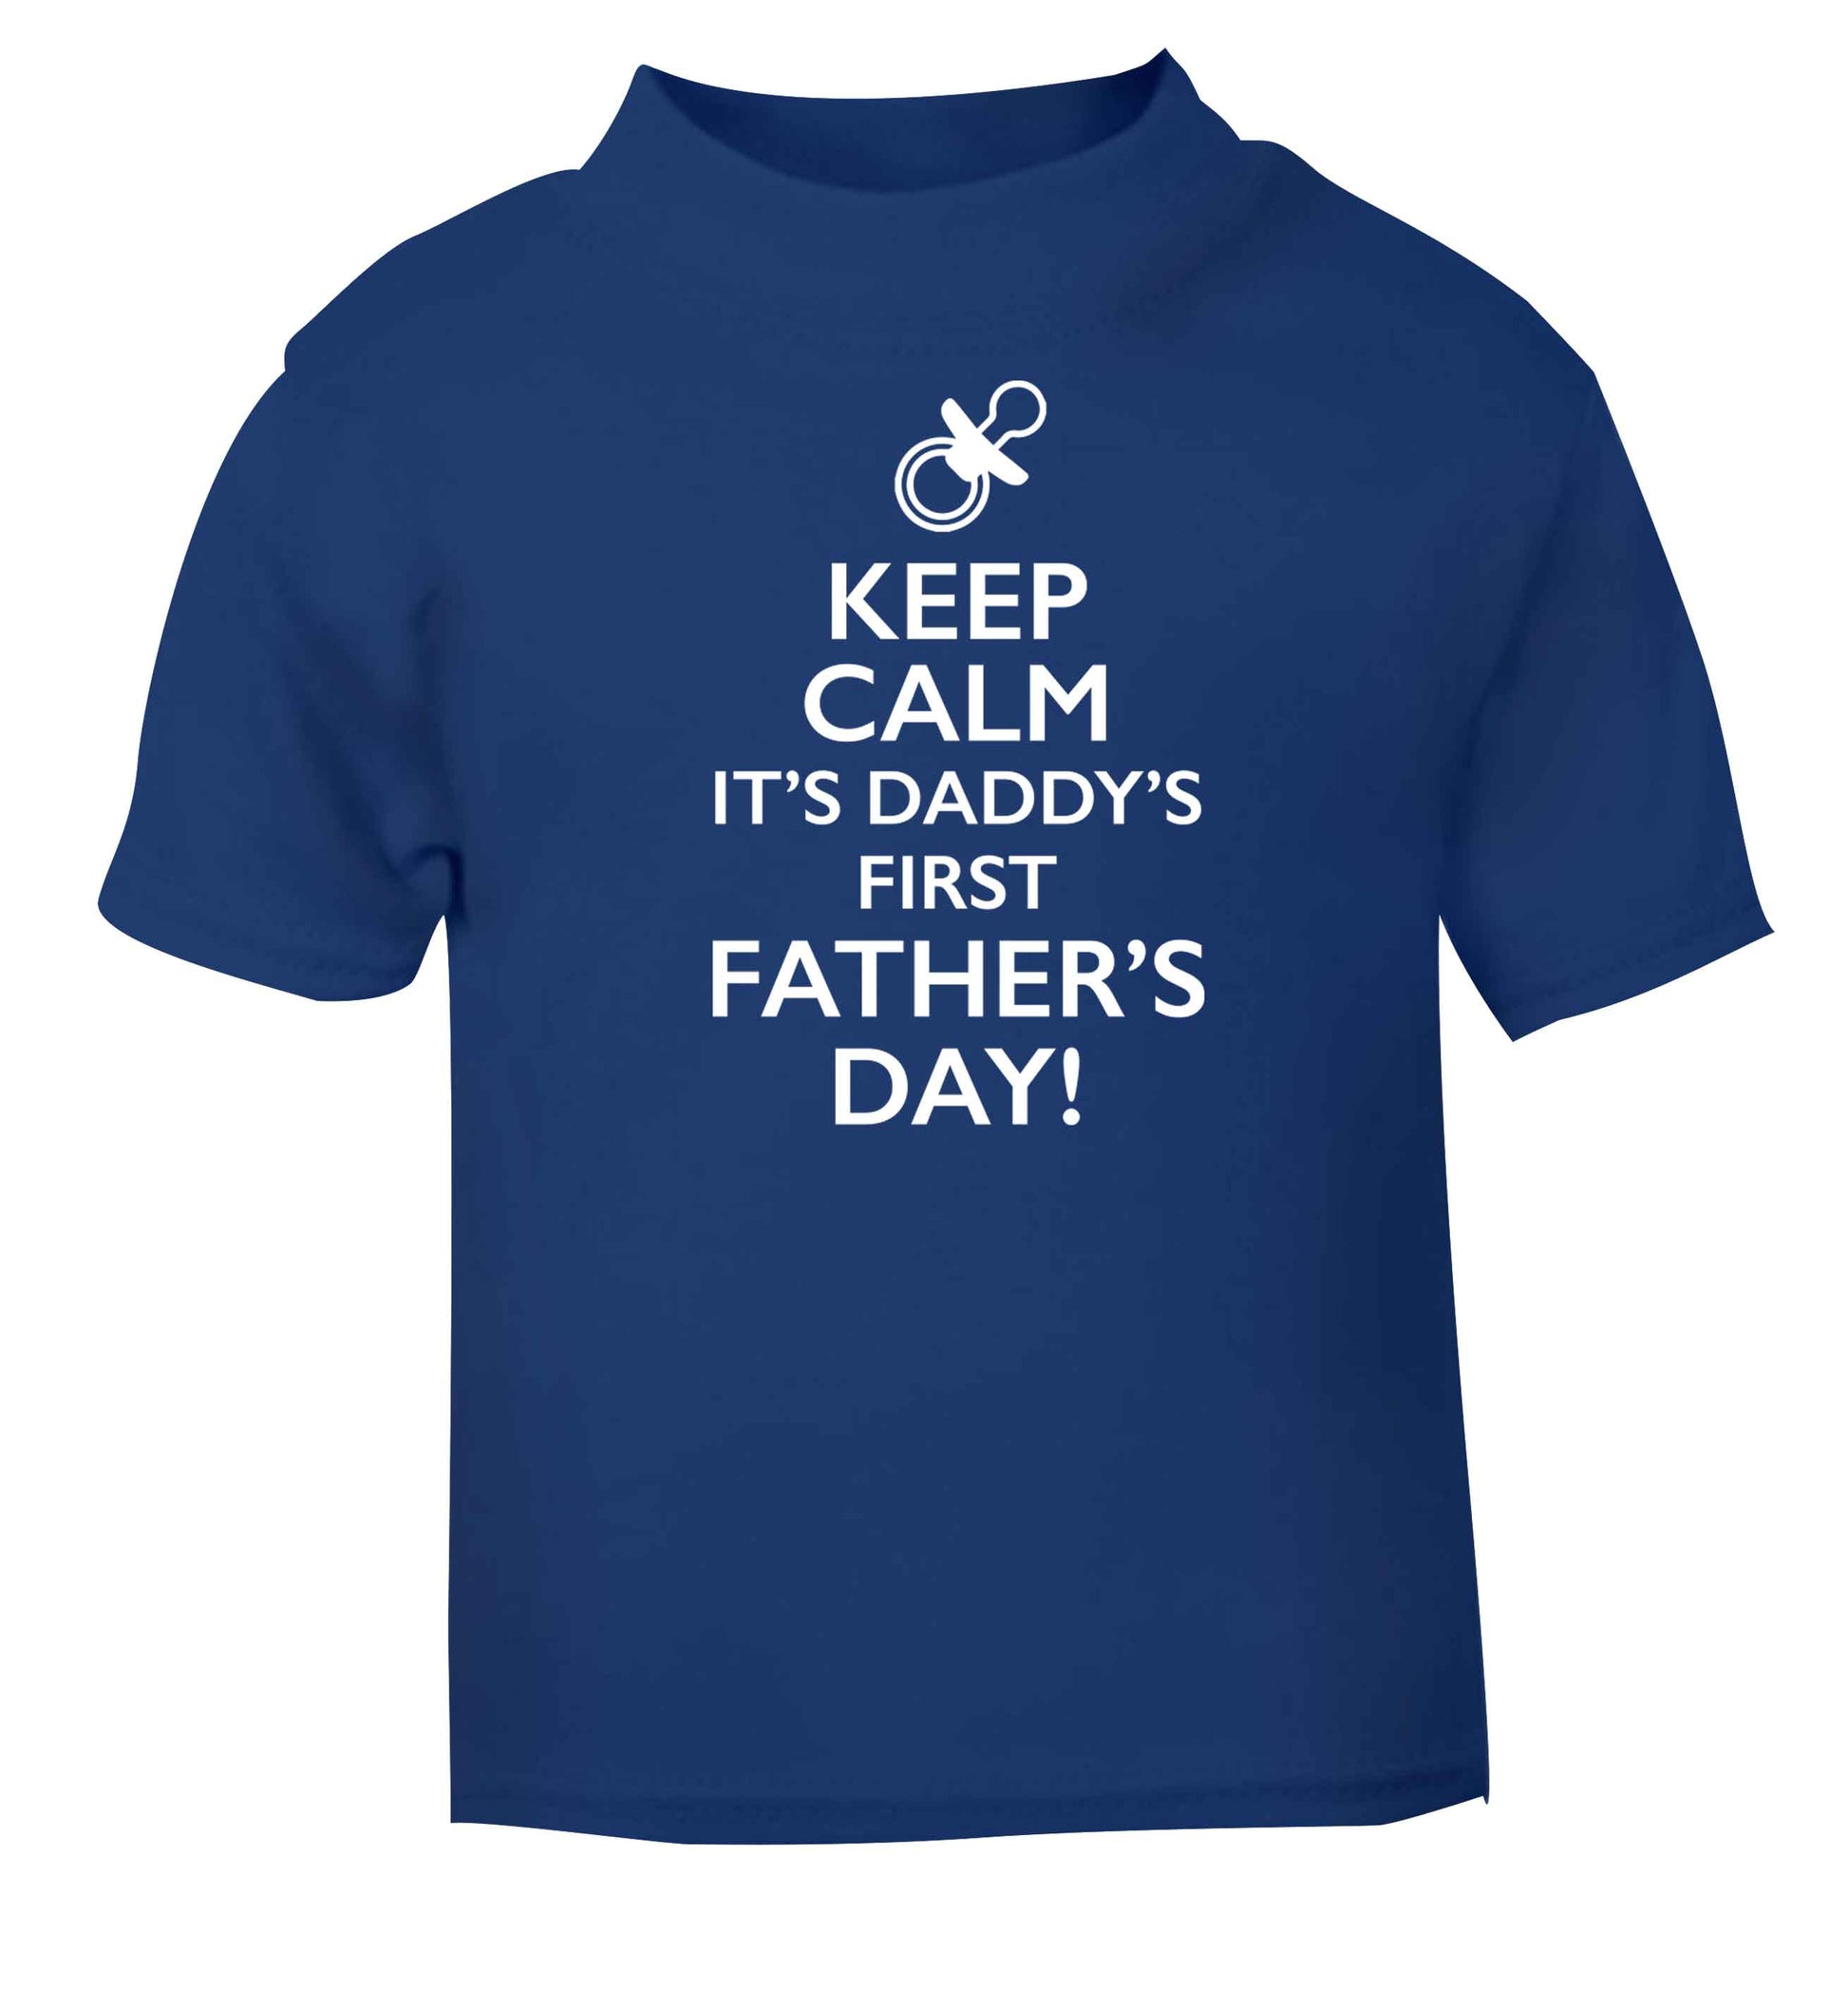 Keep calm it's daddys first father's day blue baby toddler Tshirt 2 Years